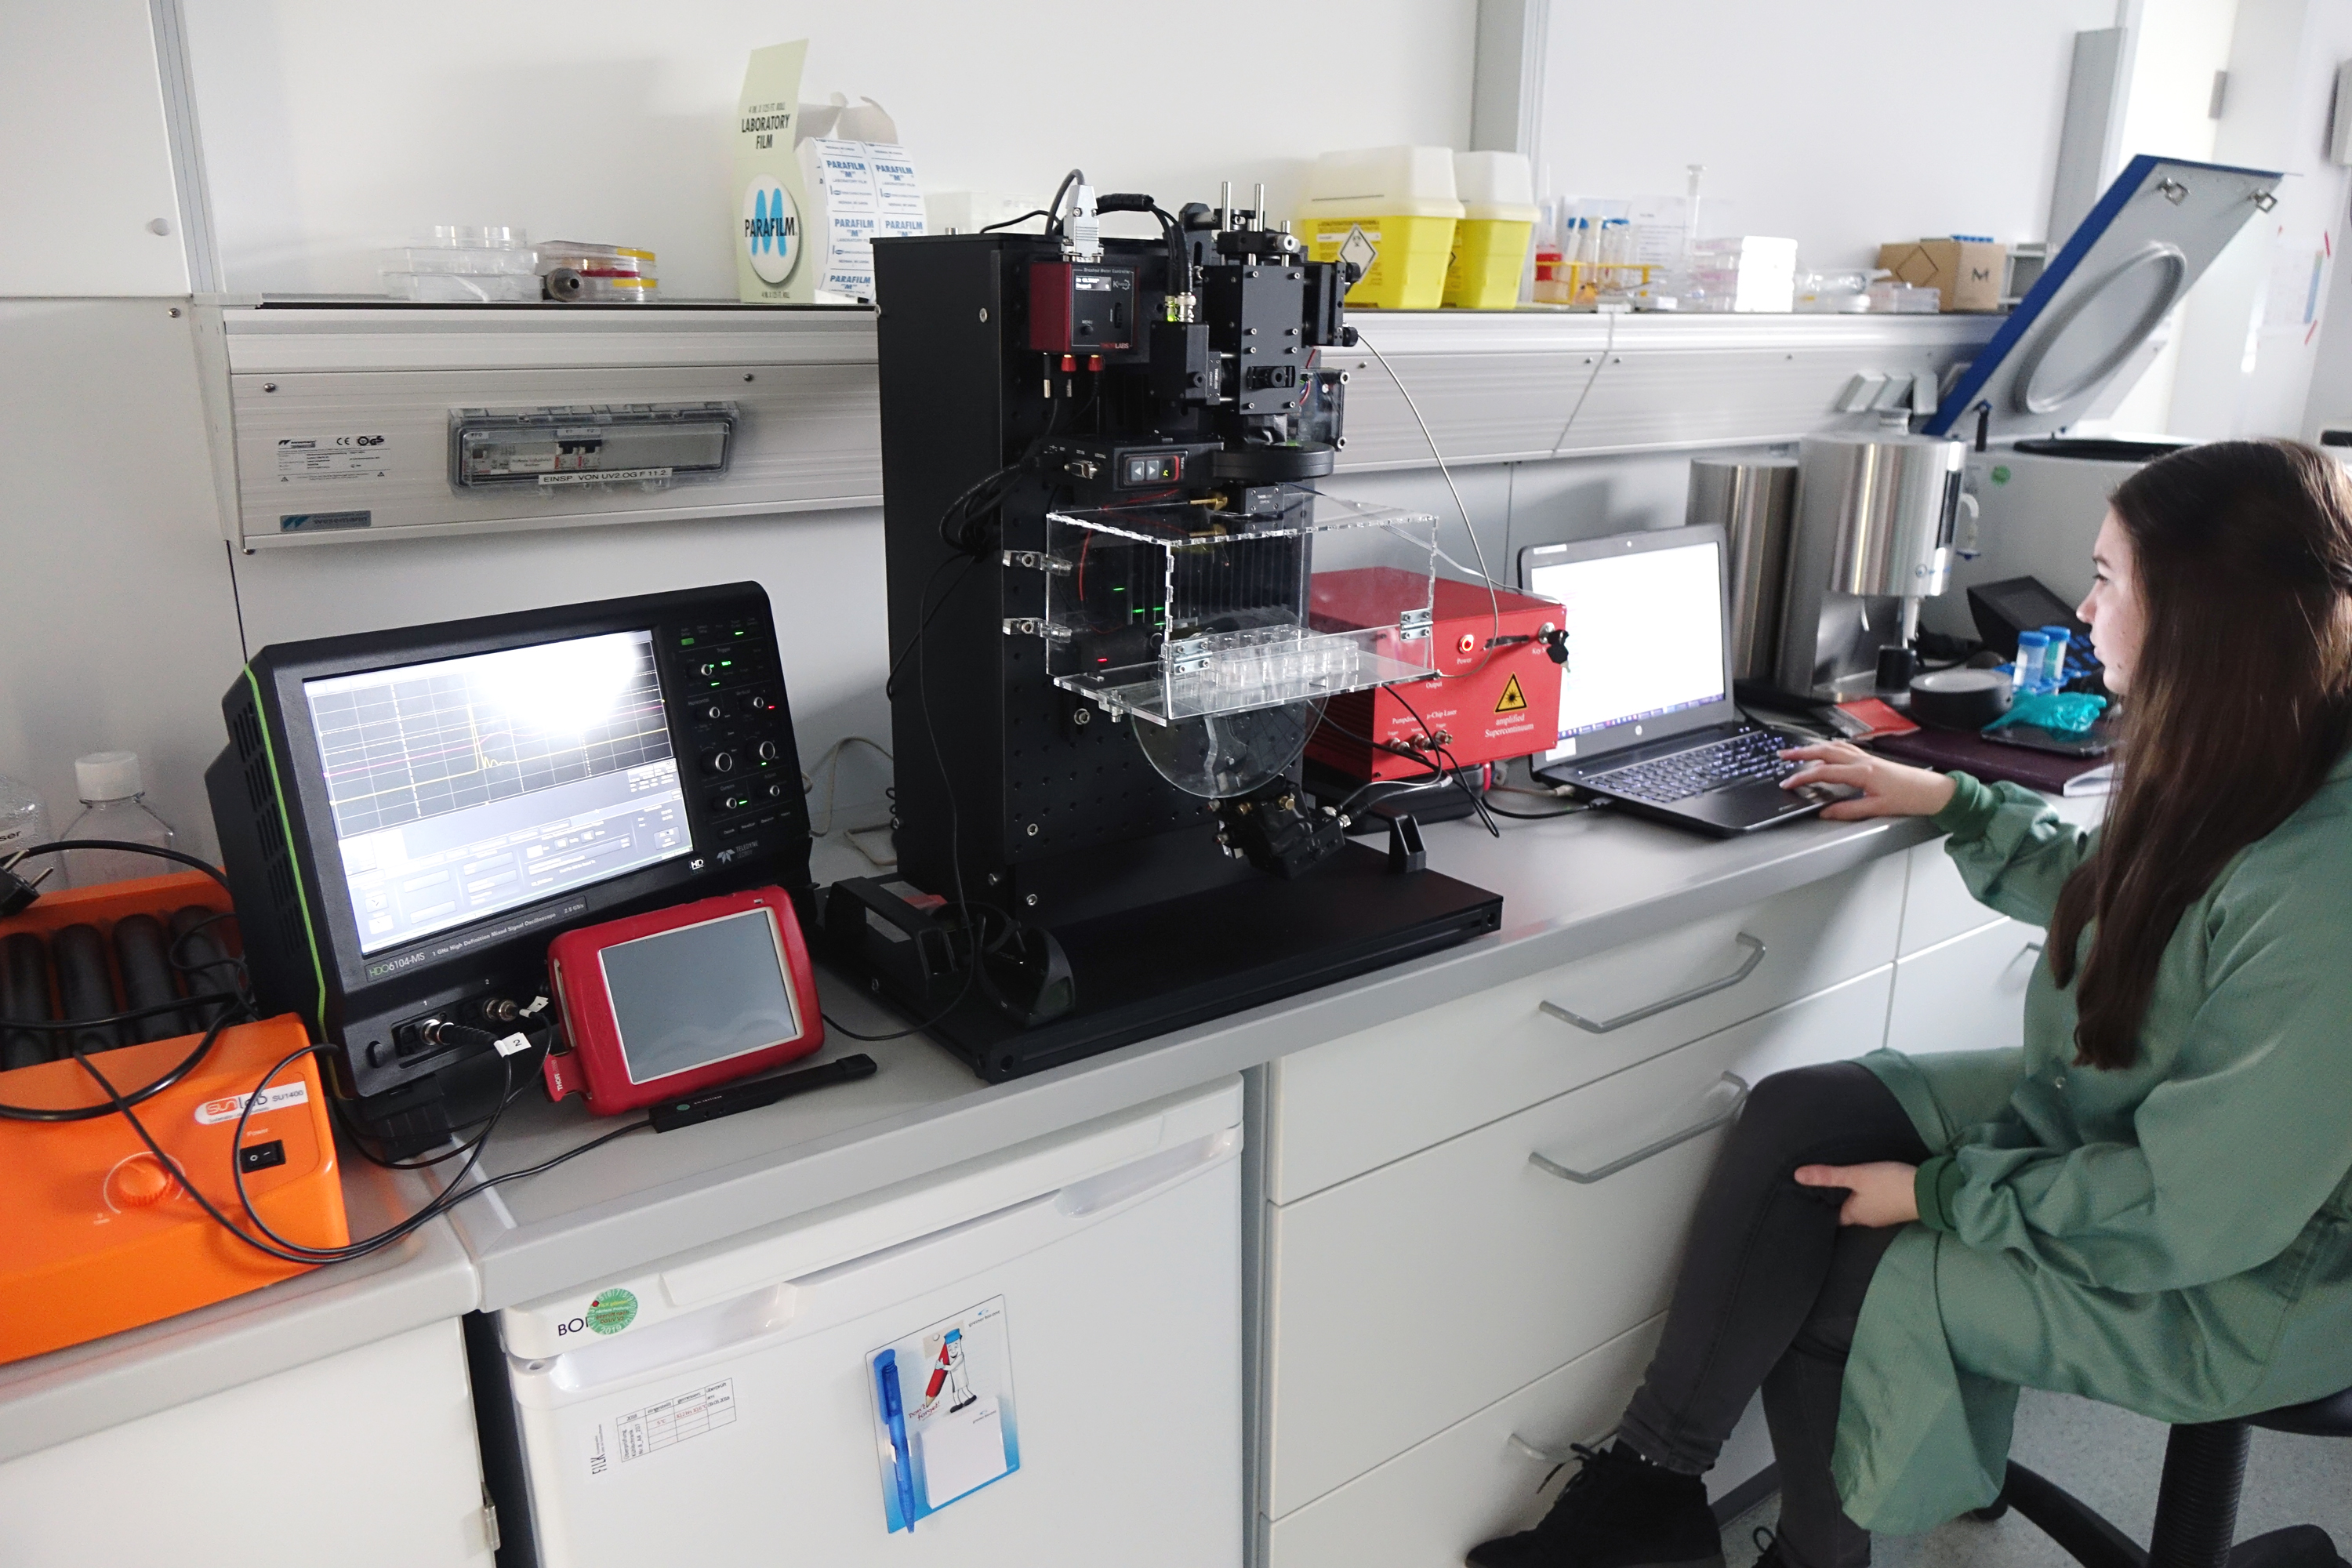 Mona Seemann, research assistant at Fraunhofer AZOM, working in the cell biology laboratory of the FILK Freiberg, investigating cartilage cell cultures. 